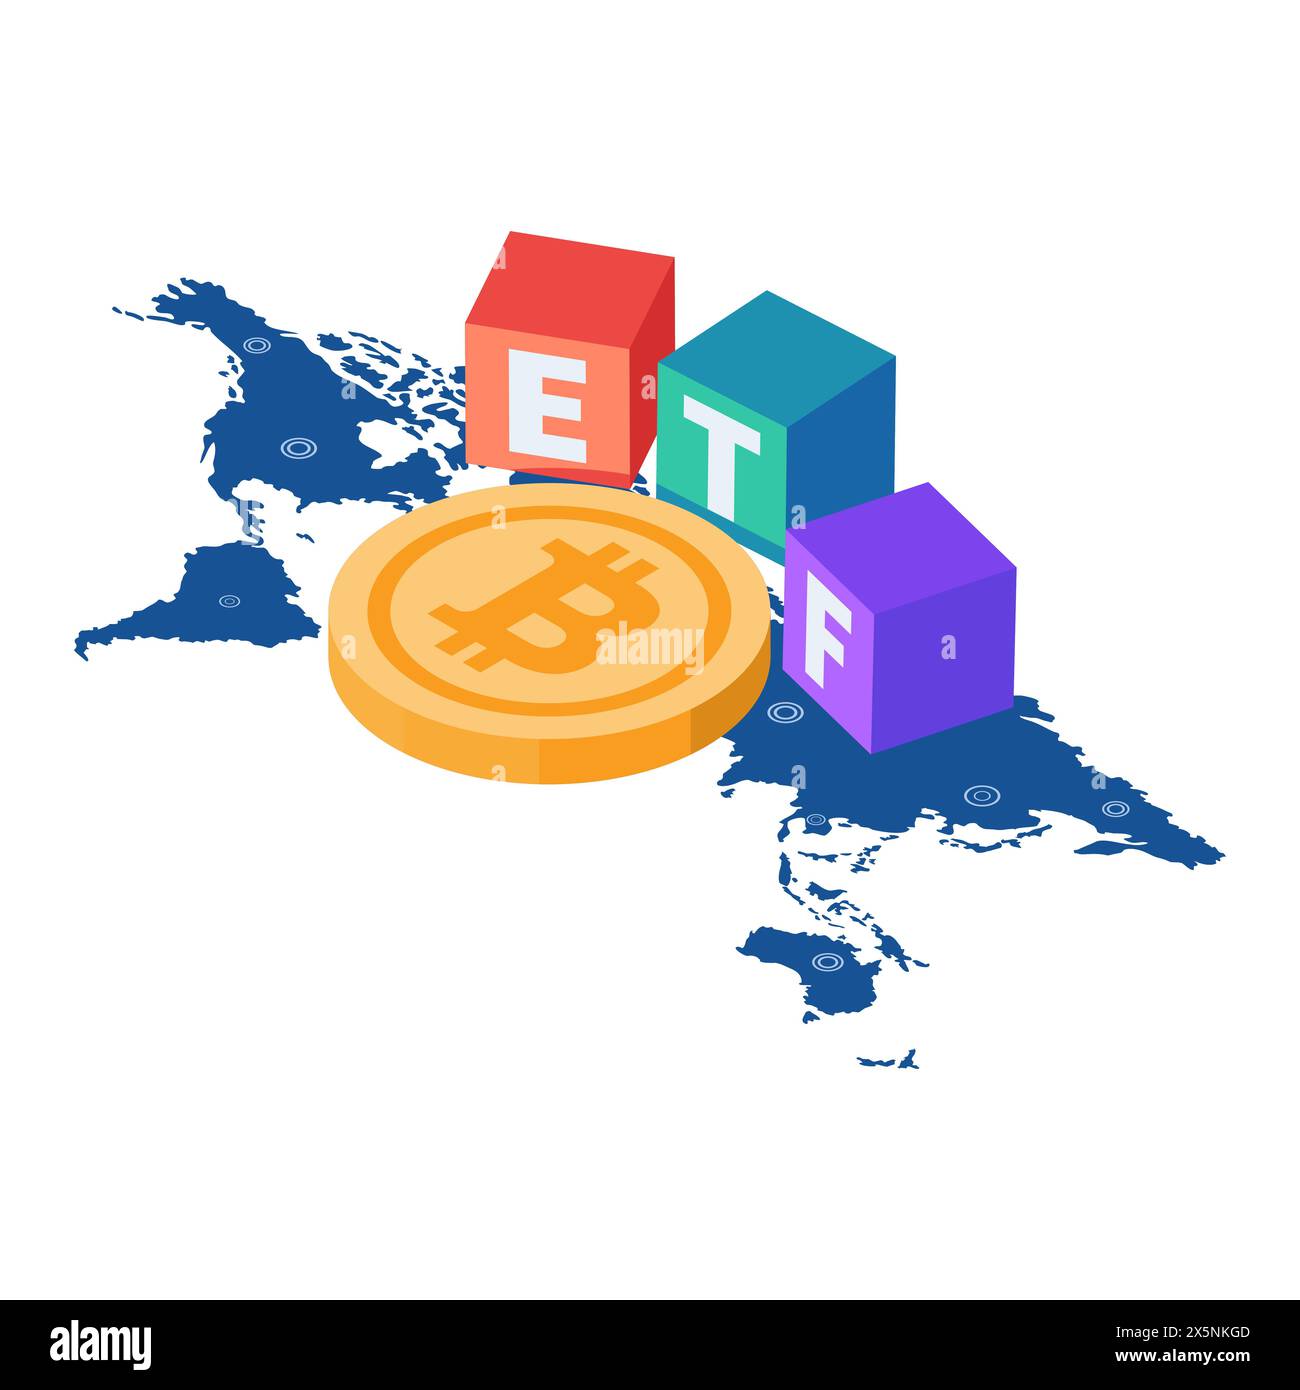 Flat 3d Isometric Bitcoin ETF on World Map. Bitcoin ETF Exchange traded fund Approval Concept. Stock Vector